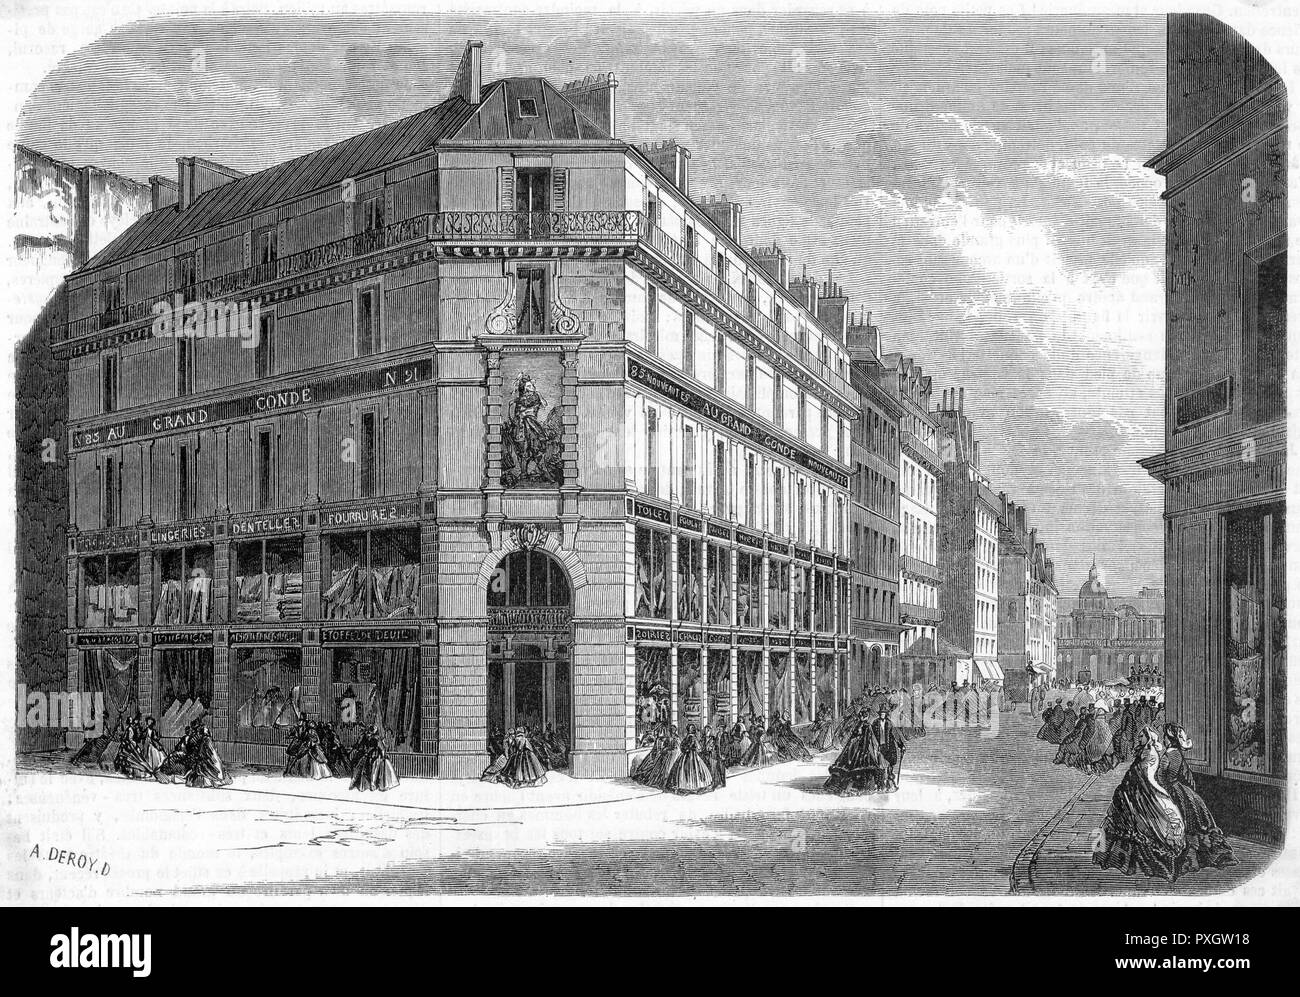 MAGASIN GRAND CONDE 1861 Banque D'Images